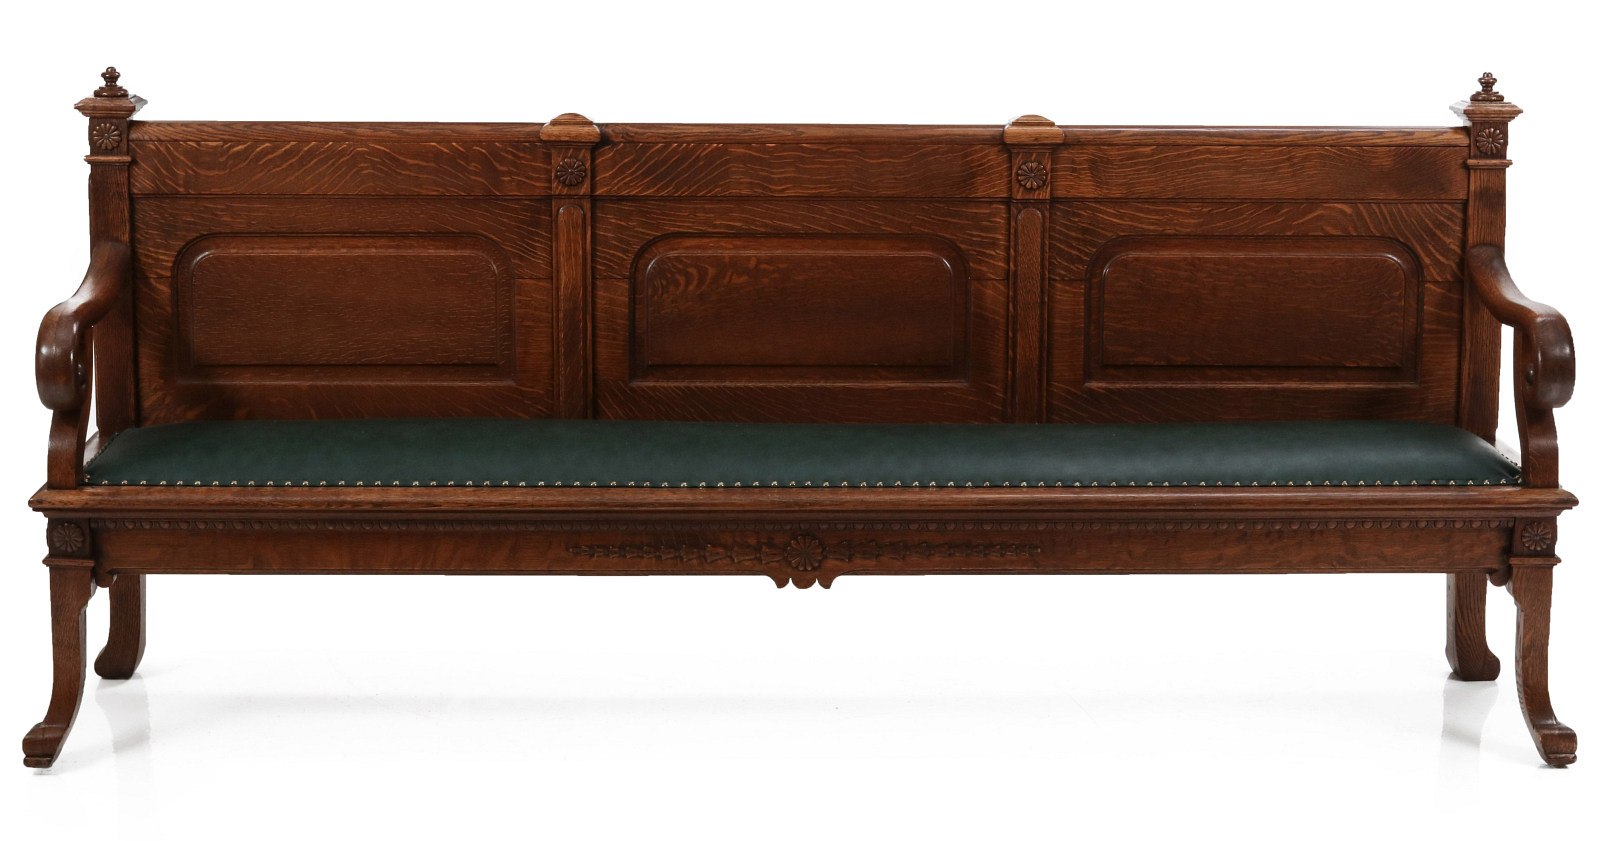 A GOOD AMERICAN OAK BENCH WITH TRIPLE PANELED BACK